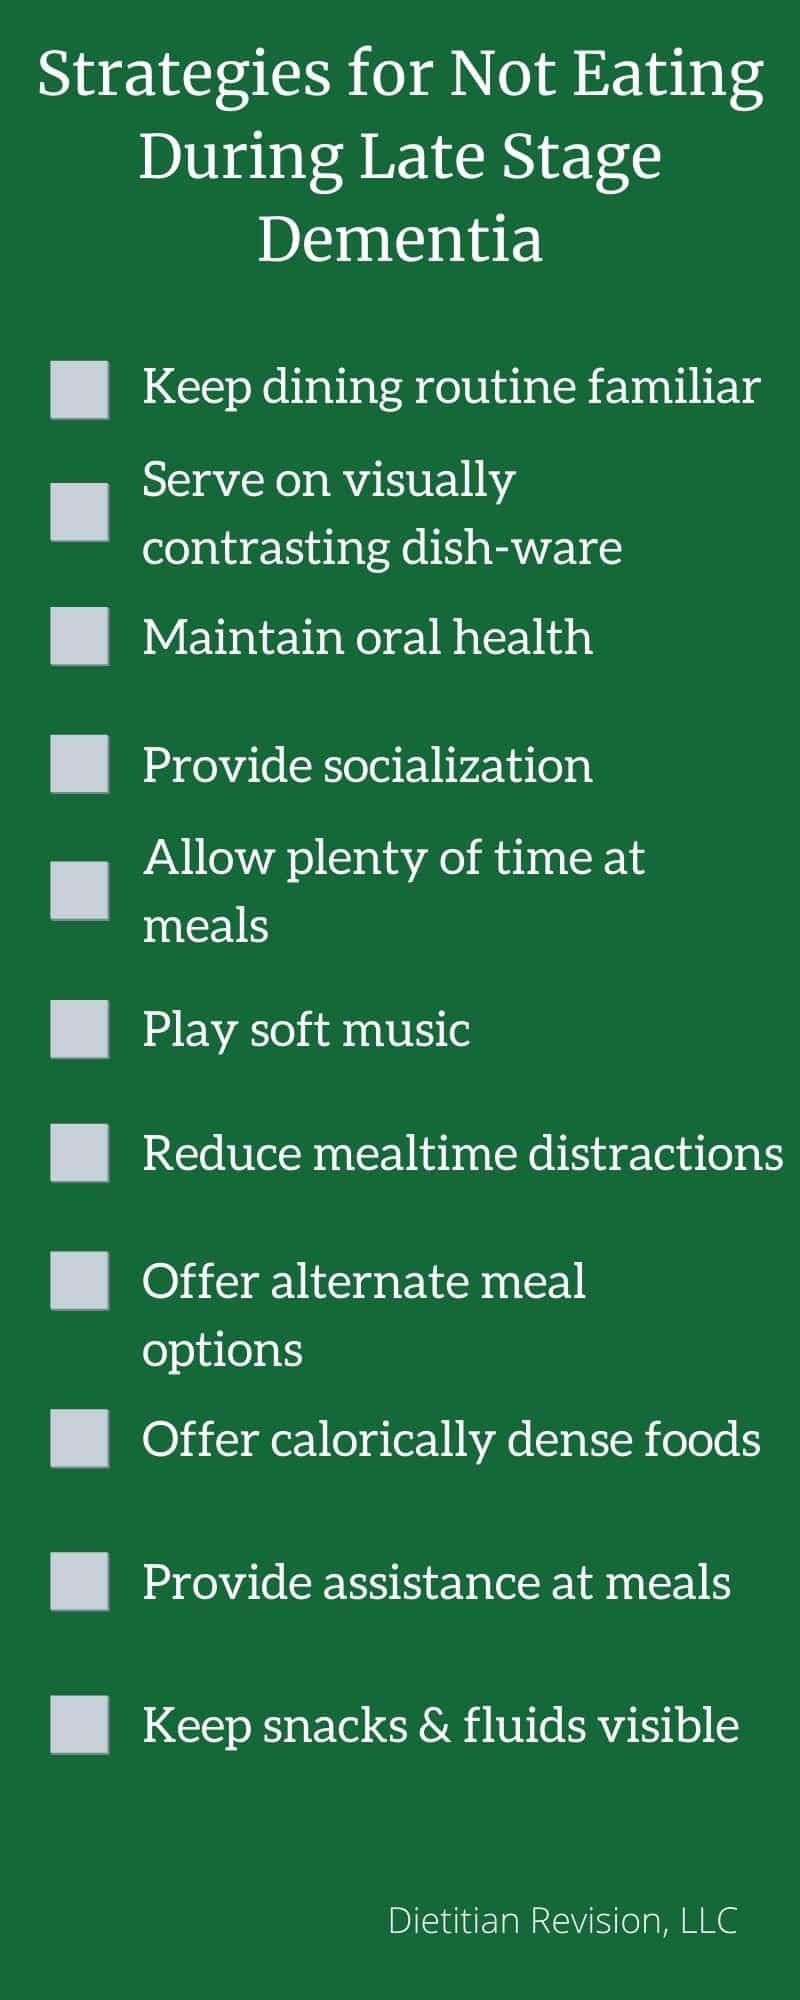 Green infographic with white writing, summarizing a list of strategies for not eating during late stage dementia: 1. Keep dining routine familiar, 2. serve on visually contrasting dish-ware, 3. maintain oral health, 4. provide socialization, 5. allow plenty of time at meals, 6. play soft music, 7. Reduced mealtime distractions, 8. offer alternate meal options, 9. provide assistance at meals, 10. keep snacks and fluids visible 